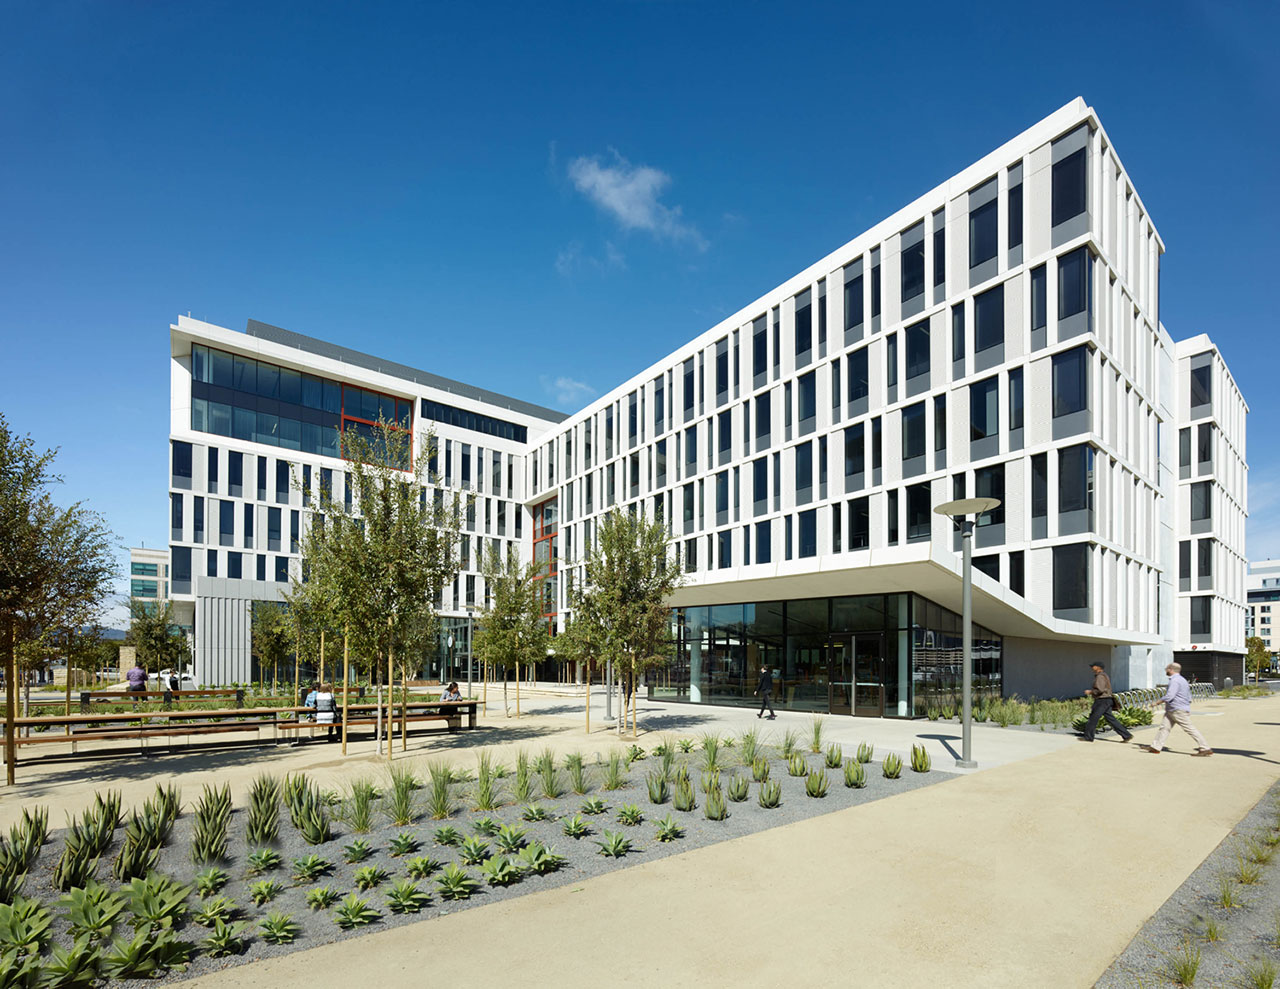 UCSF Mission Hall Global Health Sciences Building in San Francisco. Photo credit: Bruce Damonte